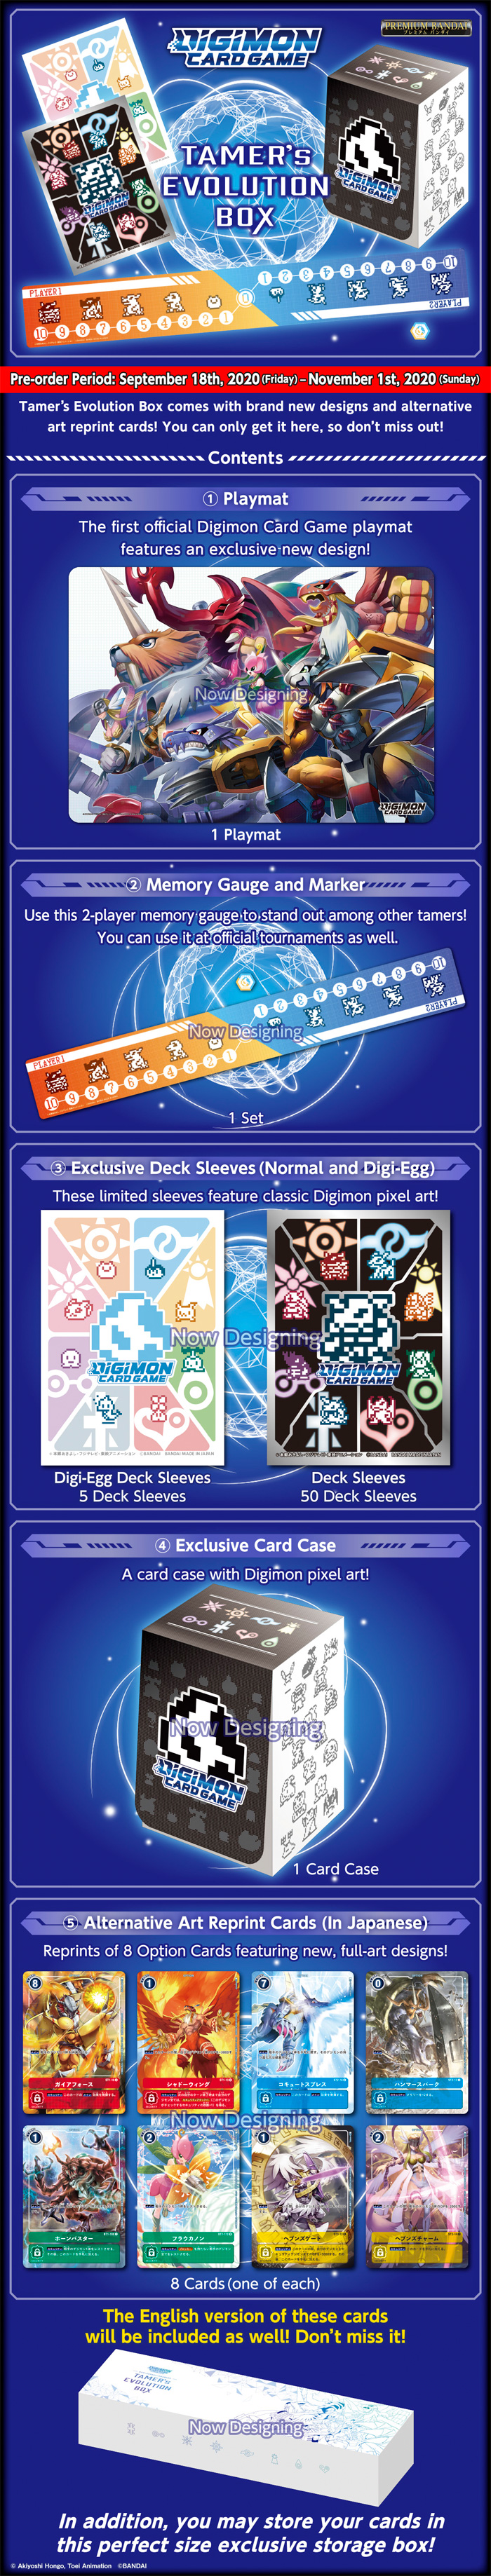 DIGIMON CARD GAME TAMER'S EVOLUTION BOX[PB-01] − PRODUCTS 